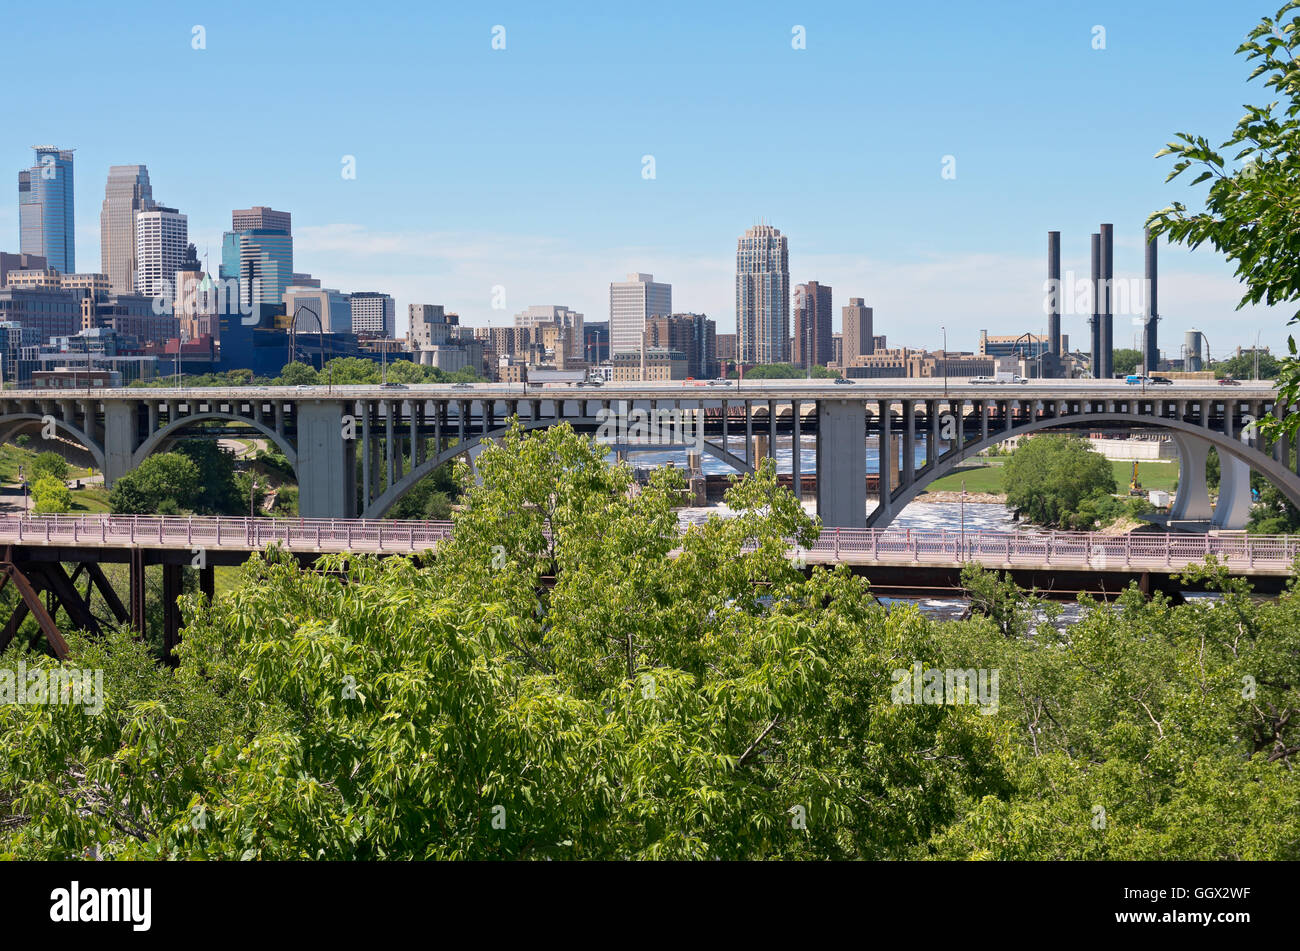 skyline of downtown minneapolis with tenth avenue and northern pacific bridges spanning mississippi river from east river road Stock Photo